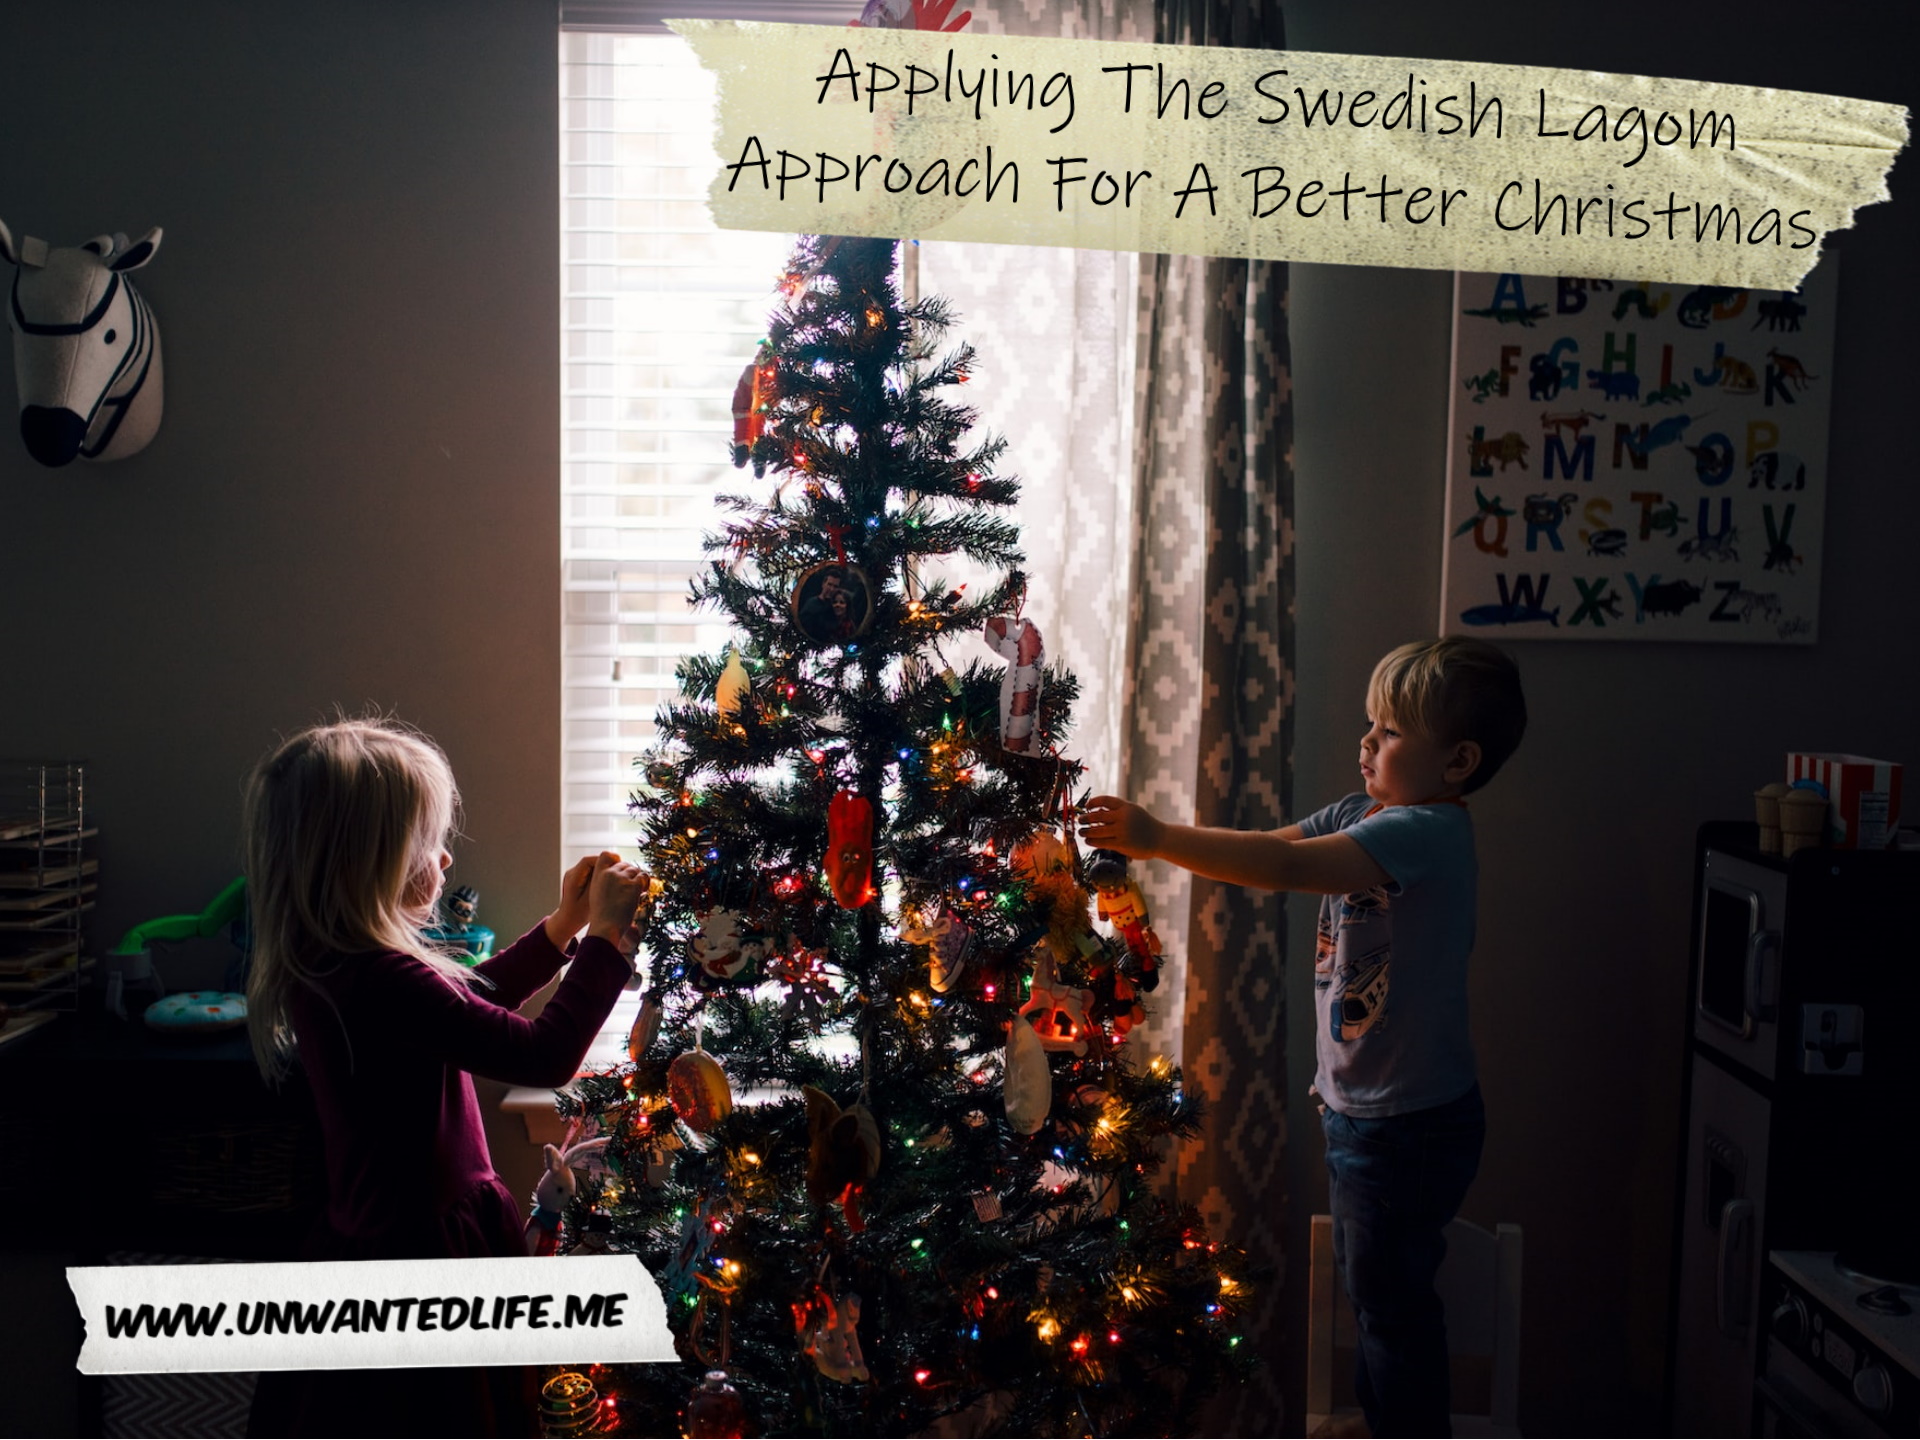 A photo of two children decorating a Christmas tree to represent the topic of the article - Applying The Swedish Lagom Approach For A Better Christmas